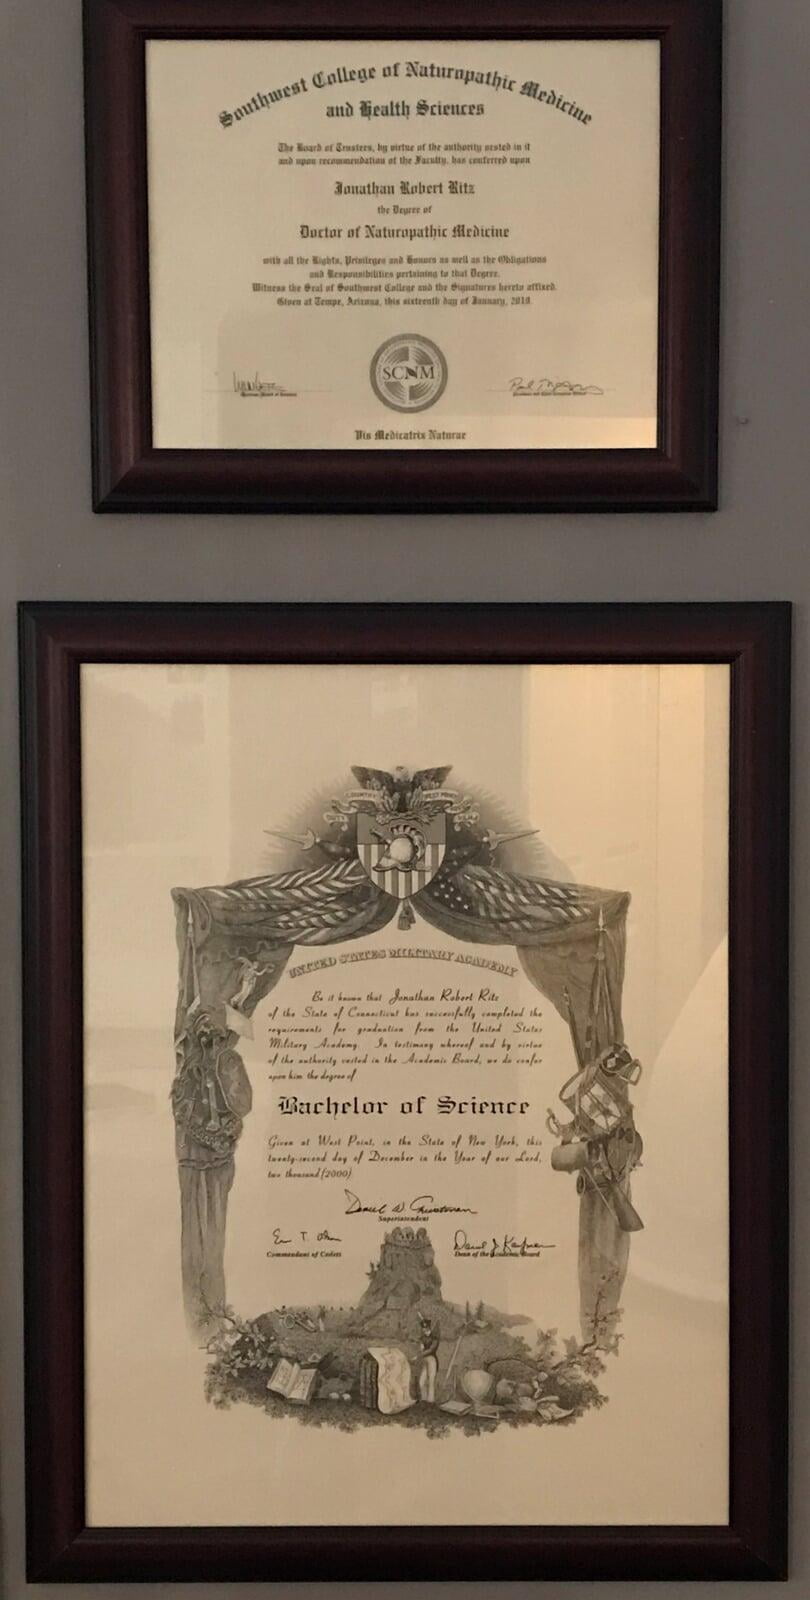 Two documents I'm most proud of: My USMA and my SCNM diplomas